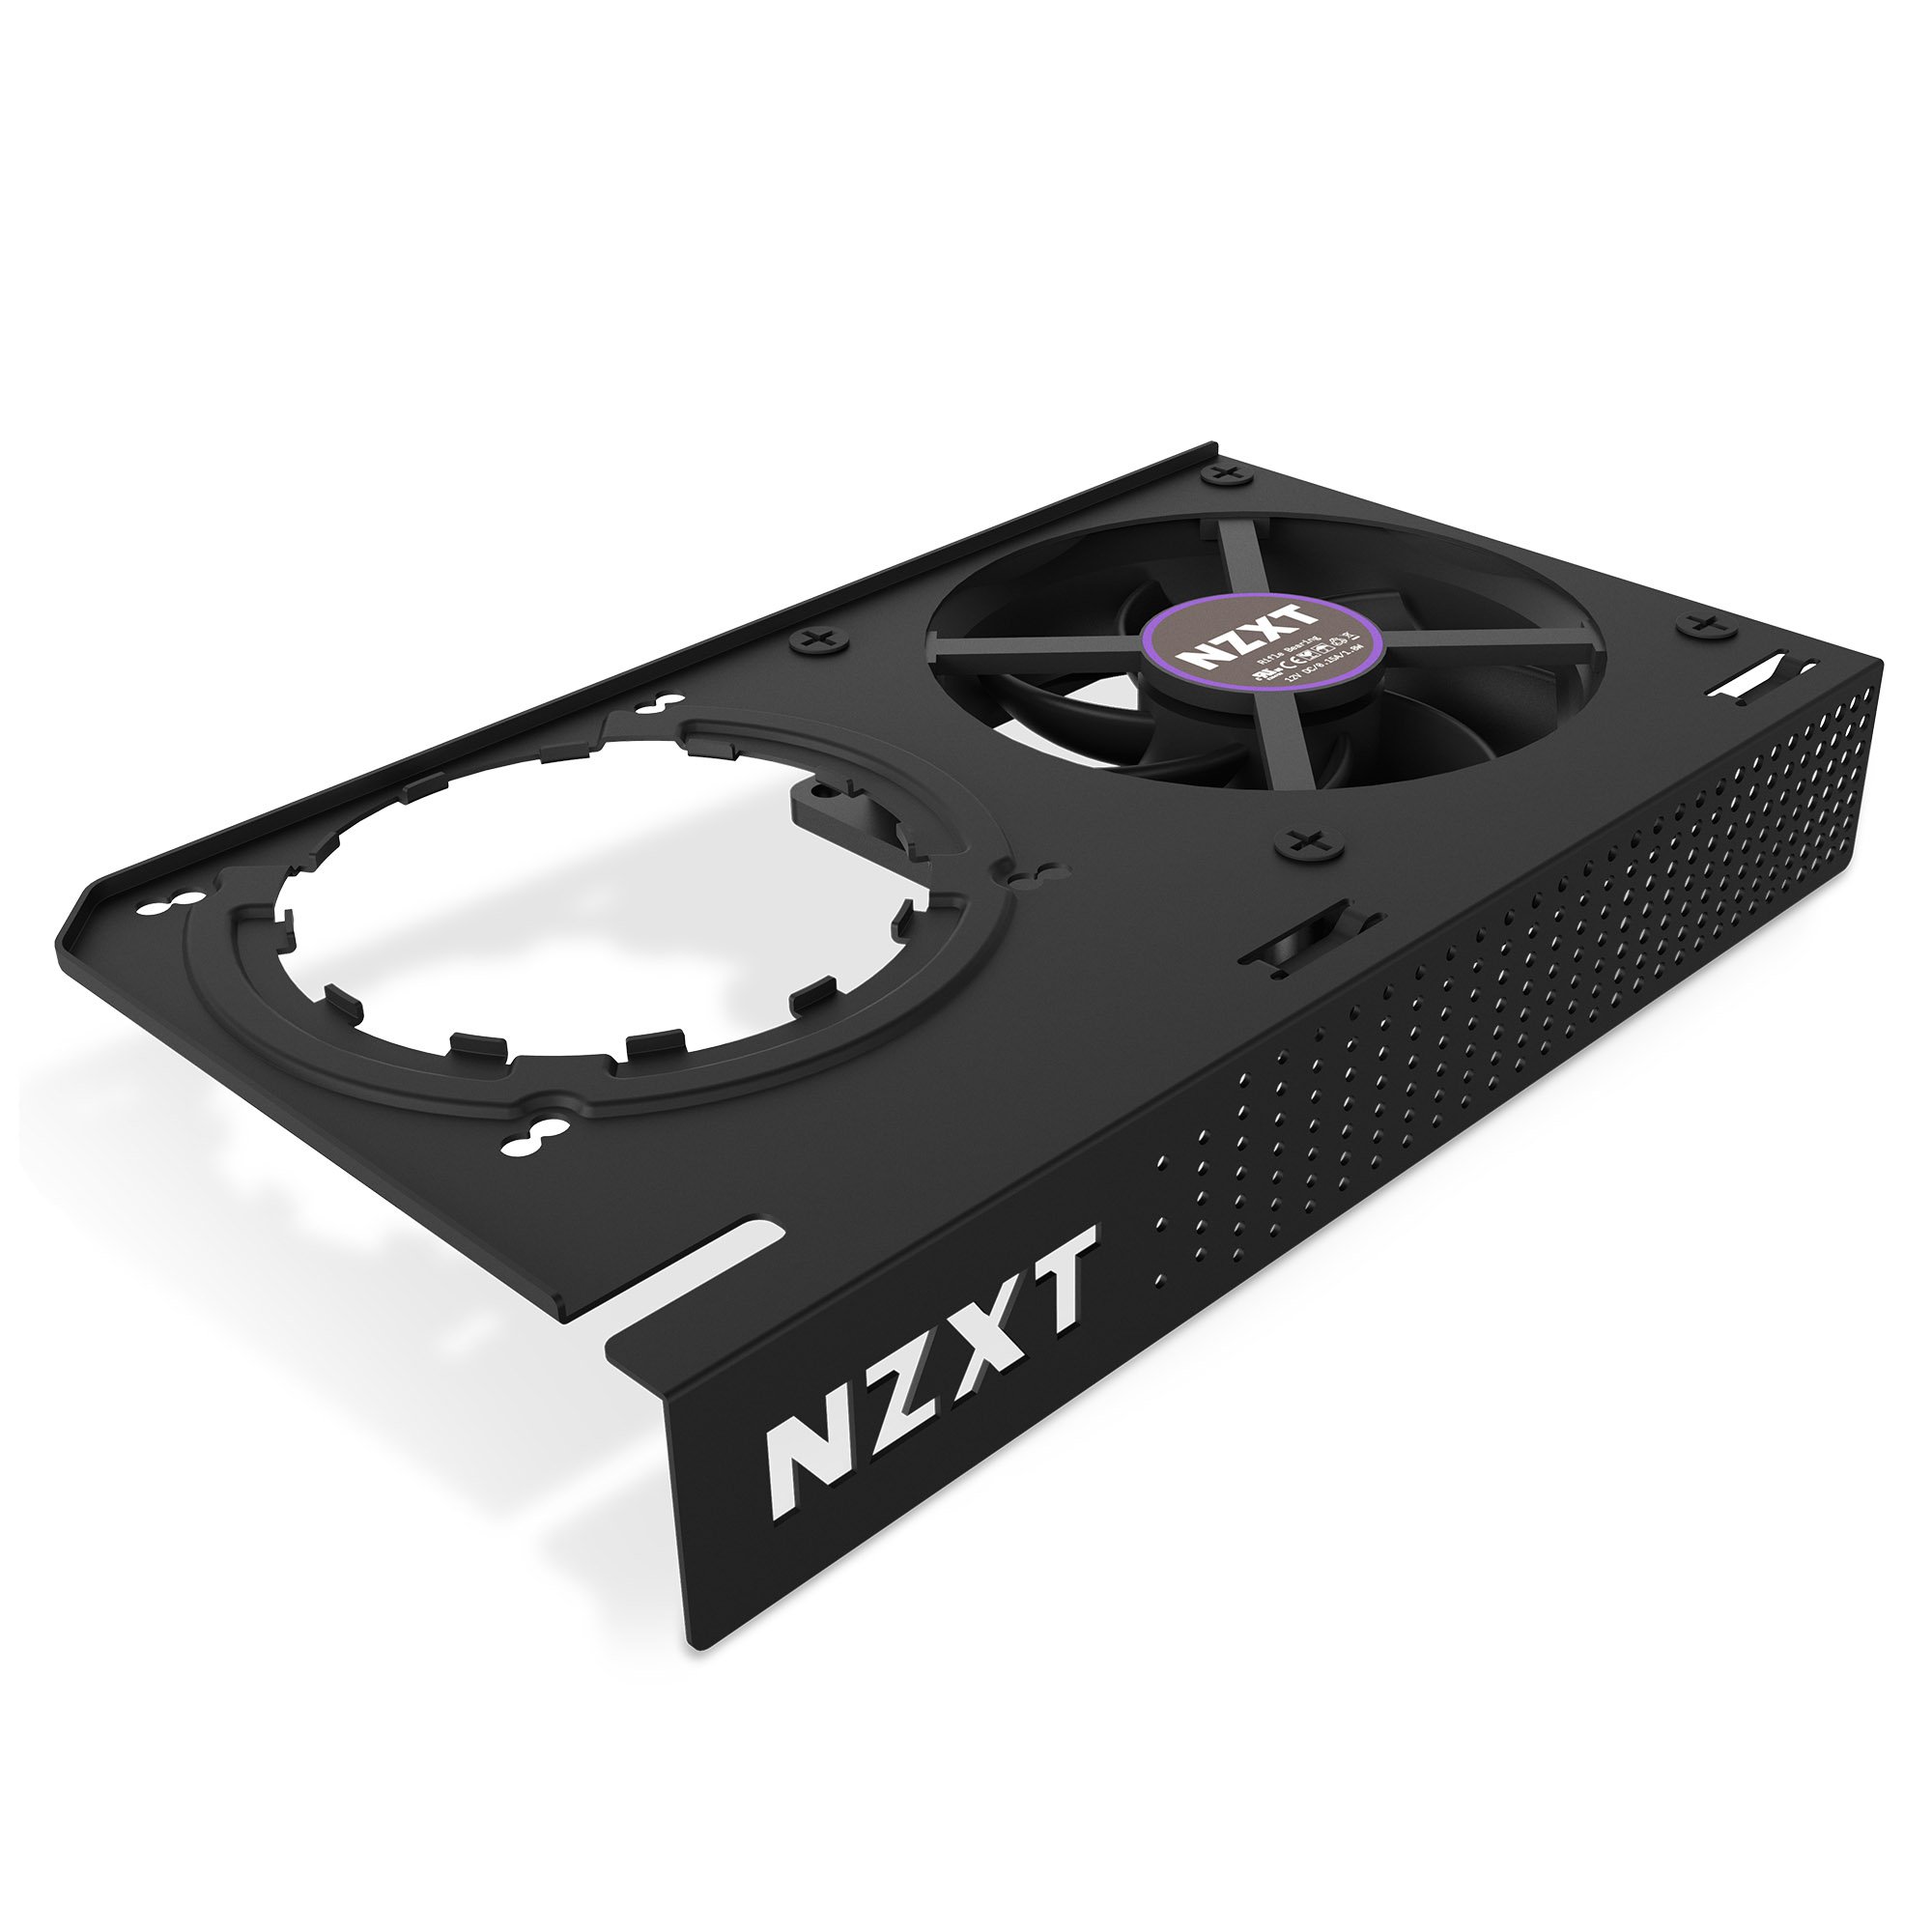 NZXT Kraken G12 - GPU Mounting Kit for Kraken X Series AIO - Enhanced GPU Cooling - AMD and NVIDIA GPU Compatibility - Active Cooling for VRM - Black